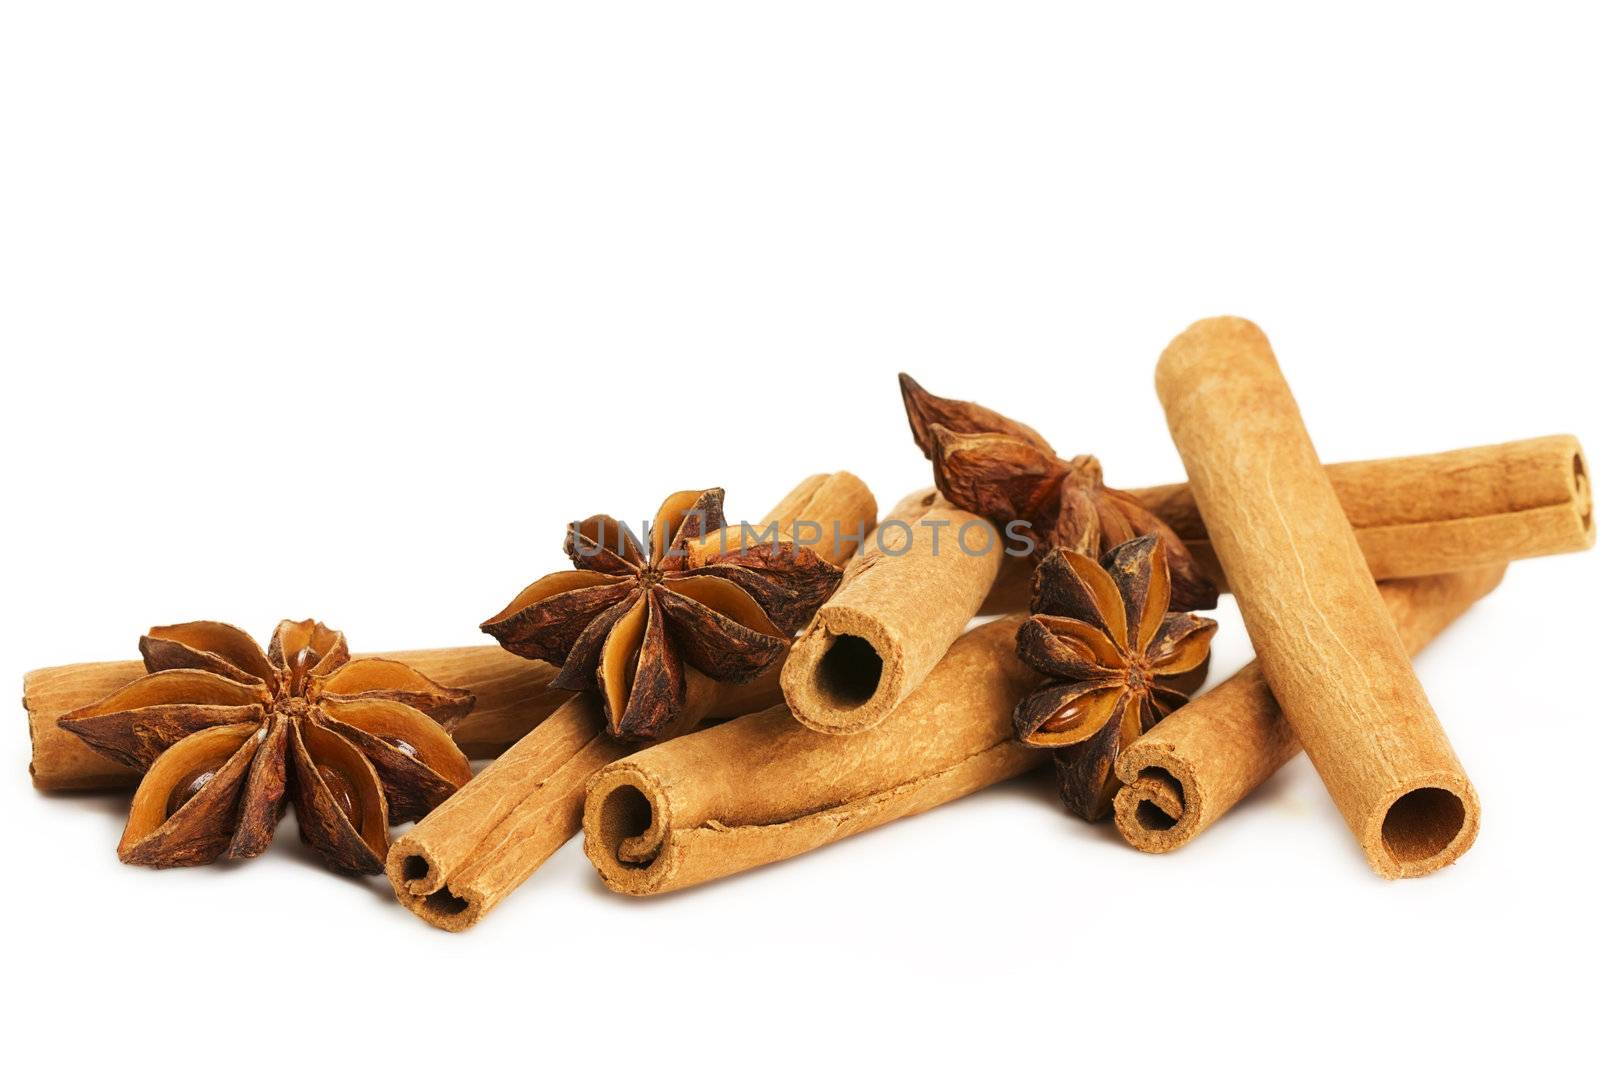 some cinnamon sticks and star anise by RobStark